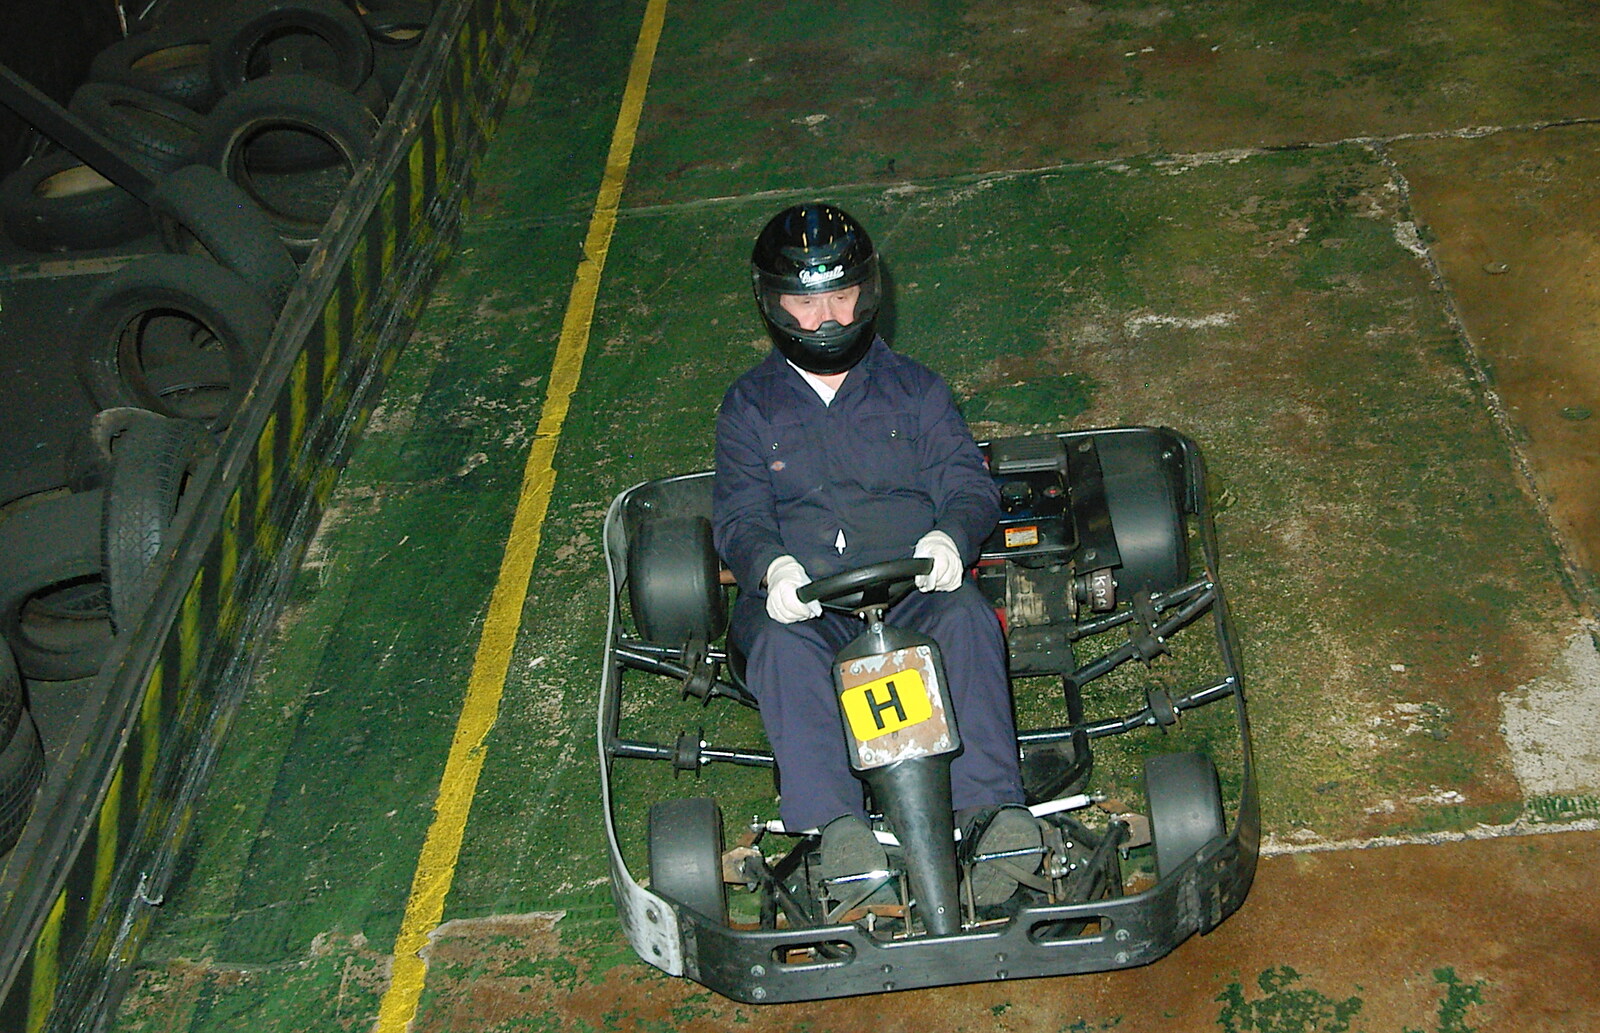 Isobel drives around from Qualcomm goes Karting in Caxton, Cambridgeshire - 7th November 2005